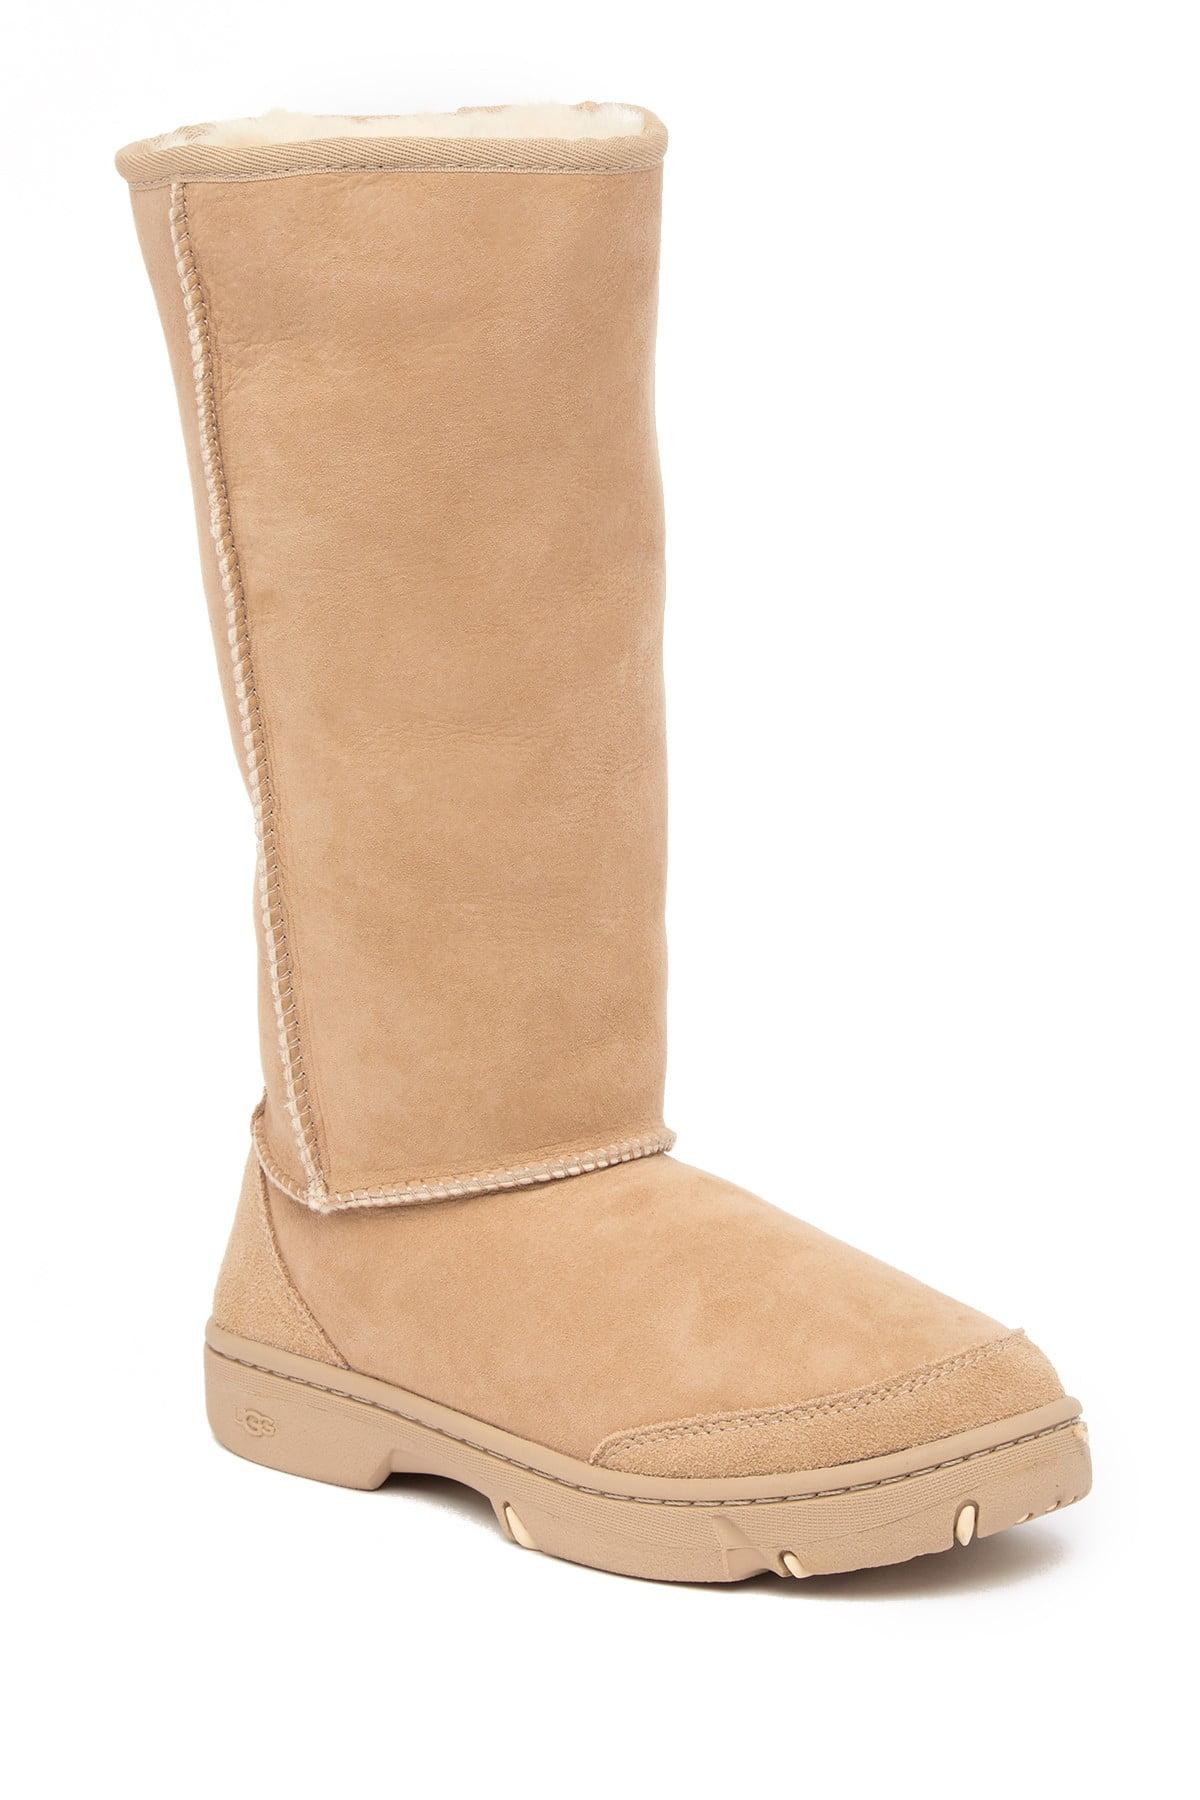 Ugg Braiden Fur Lined Boots Top Sellers, SAVE 59%.